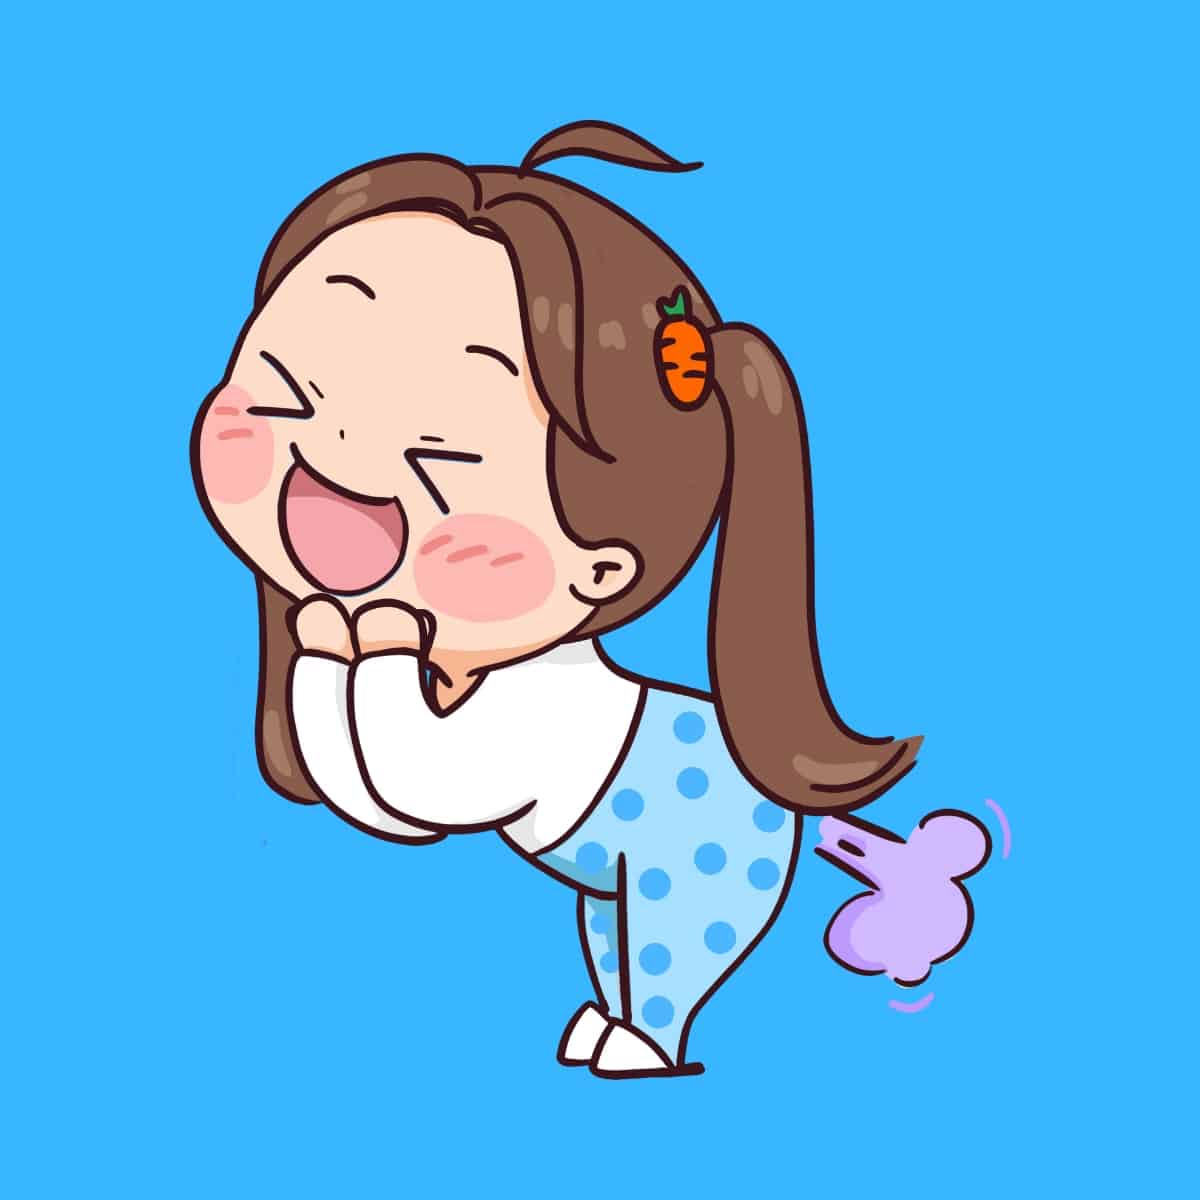 Cartoon graphic of a young girl doing a fart and laughing on a blue background.